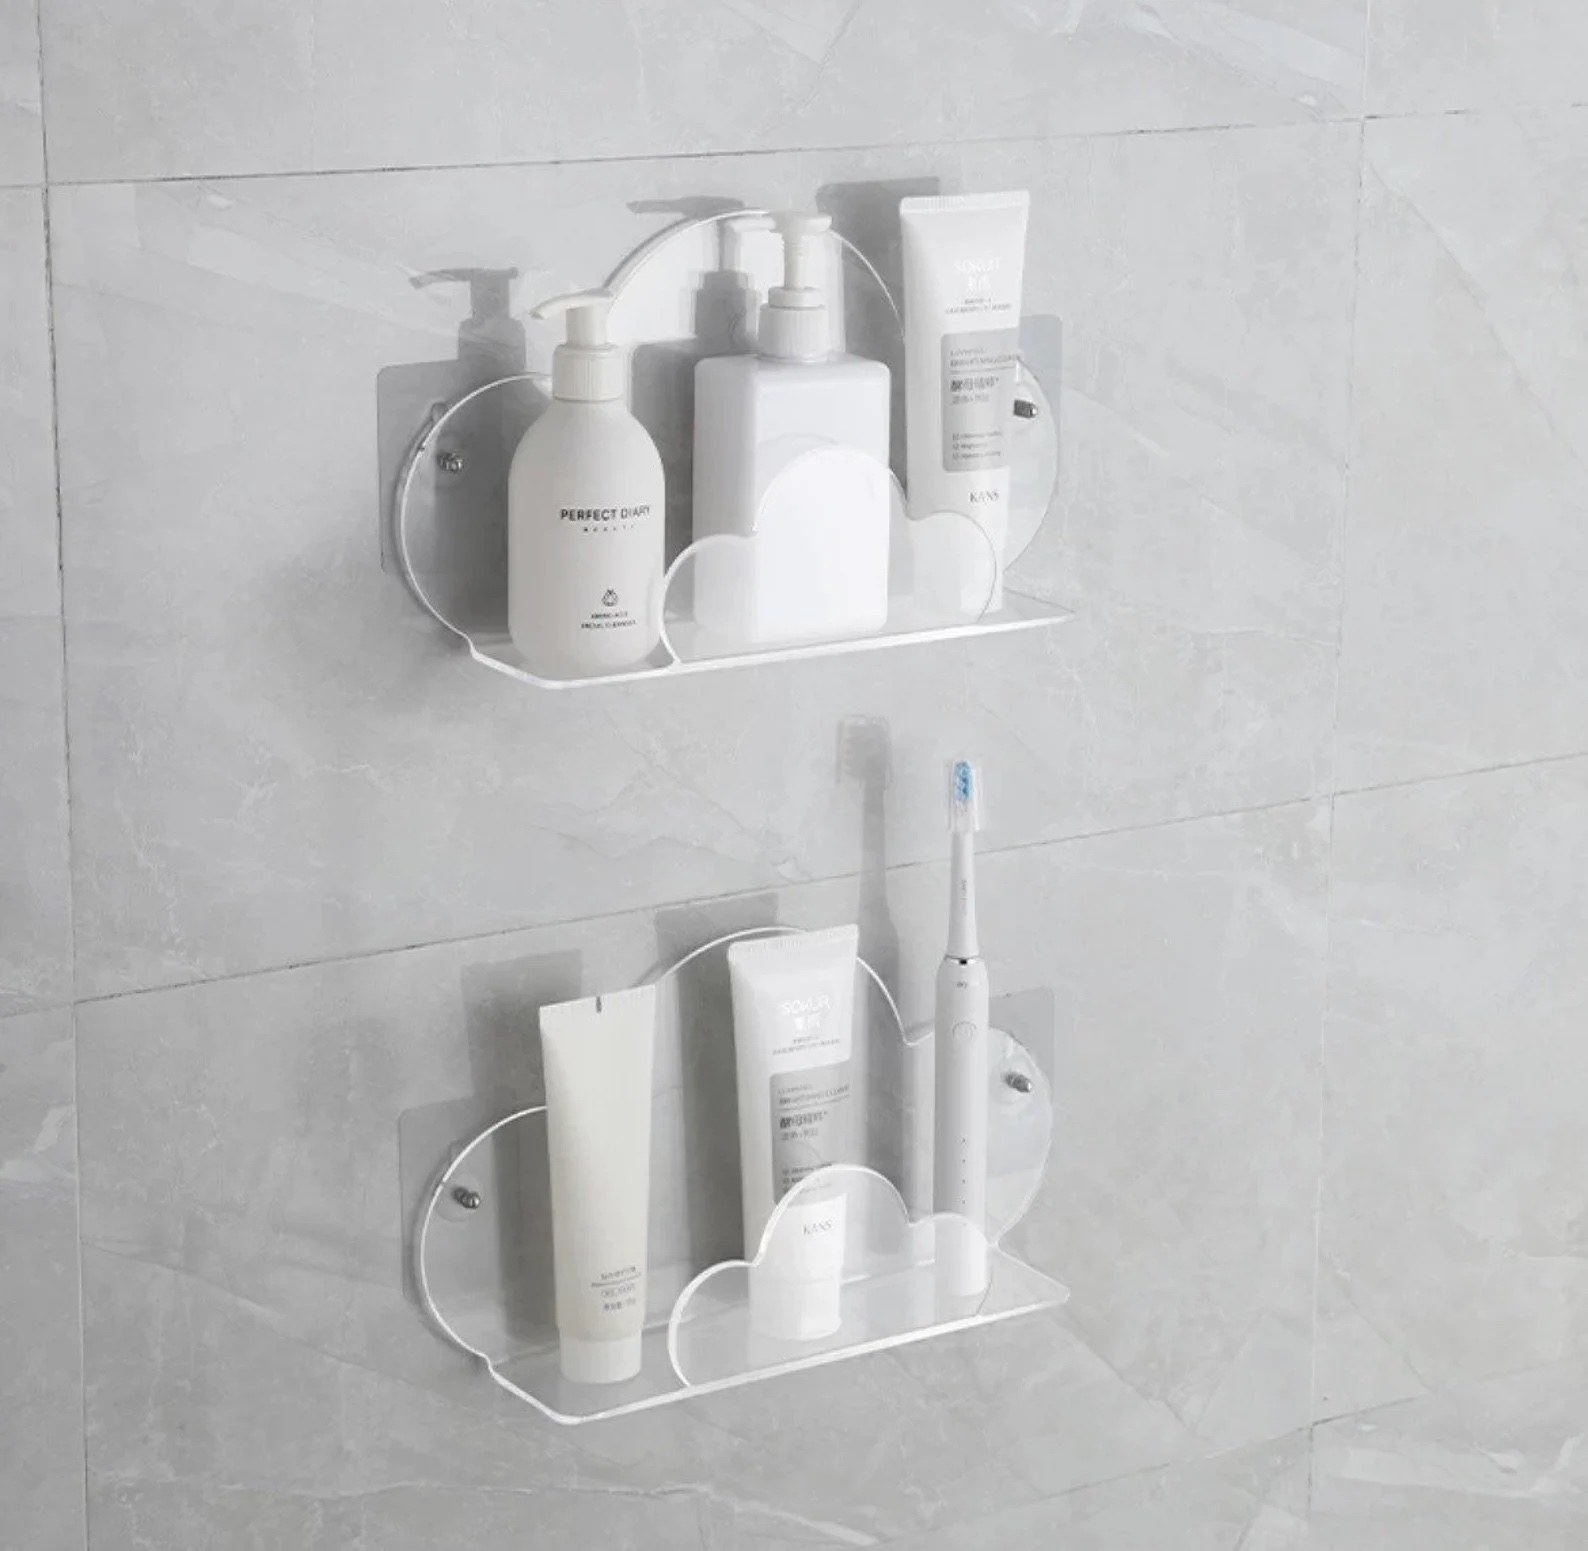 A shower with two white cloud-shaped shelves with white skincare/haircare bottles on them